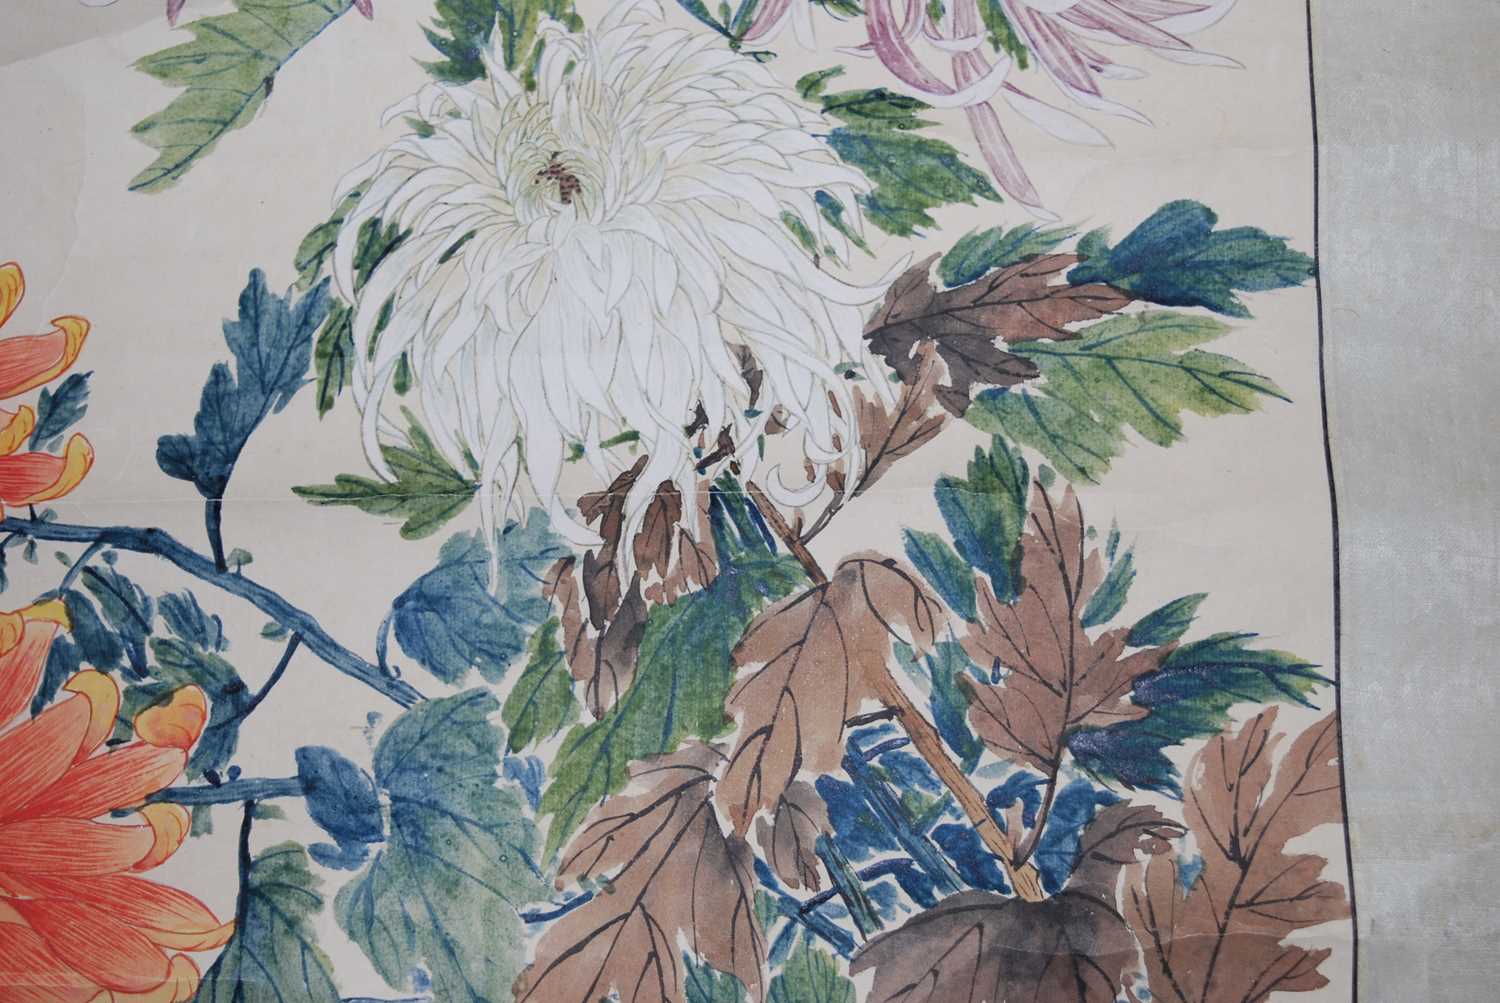 Yuan Yunyi (袁韻宜) (1920-2004) - Chrysanthemums, Republic of China scroll painting dated 1944, ink - Image 25 of 31